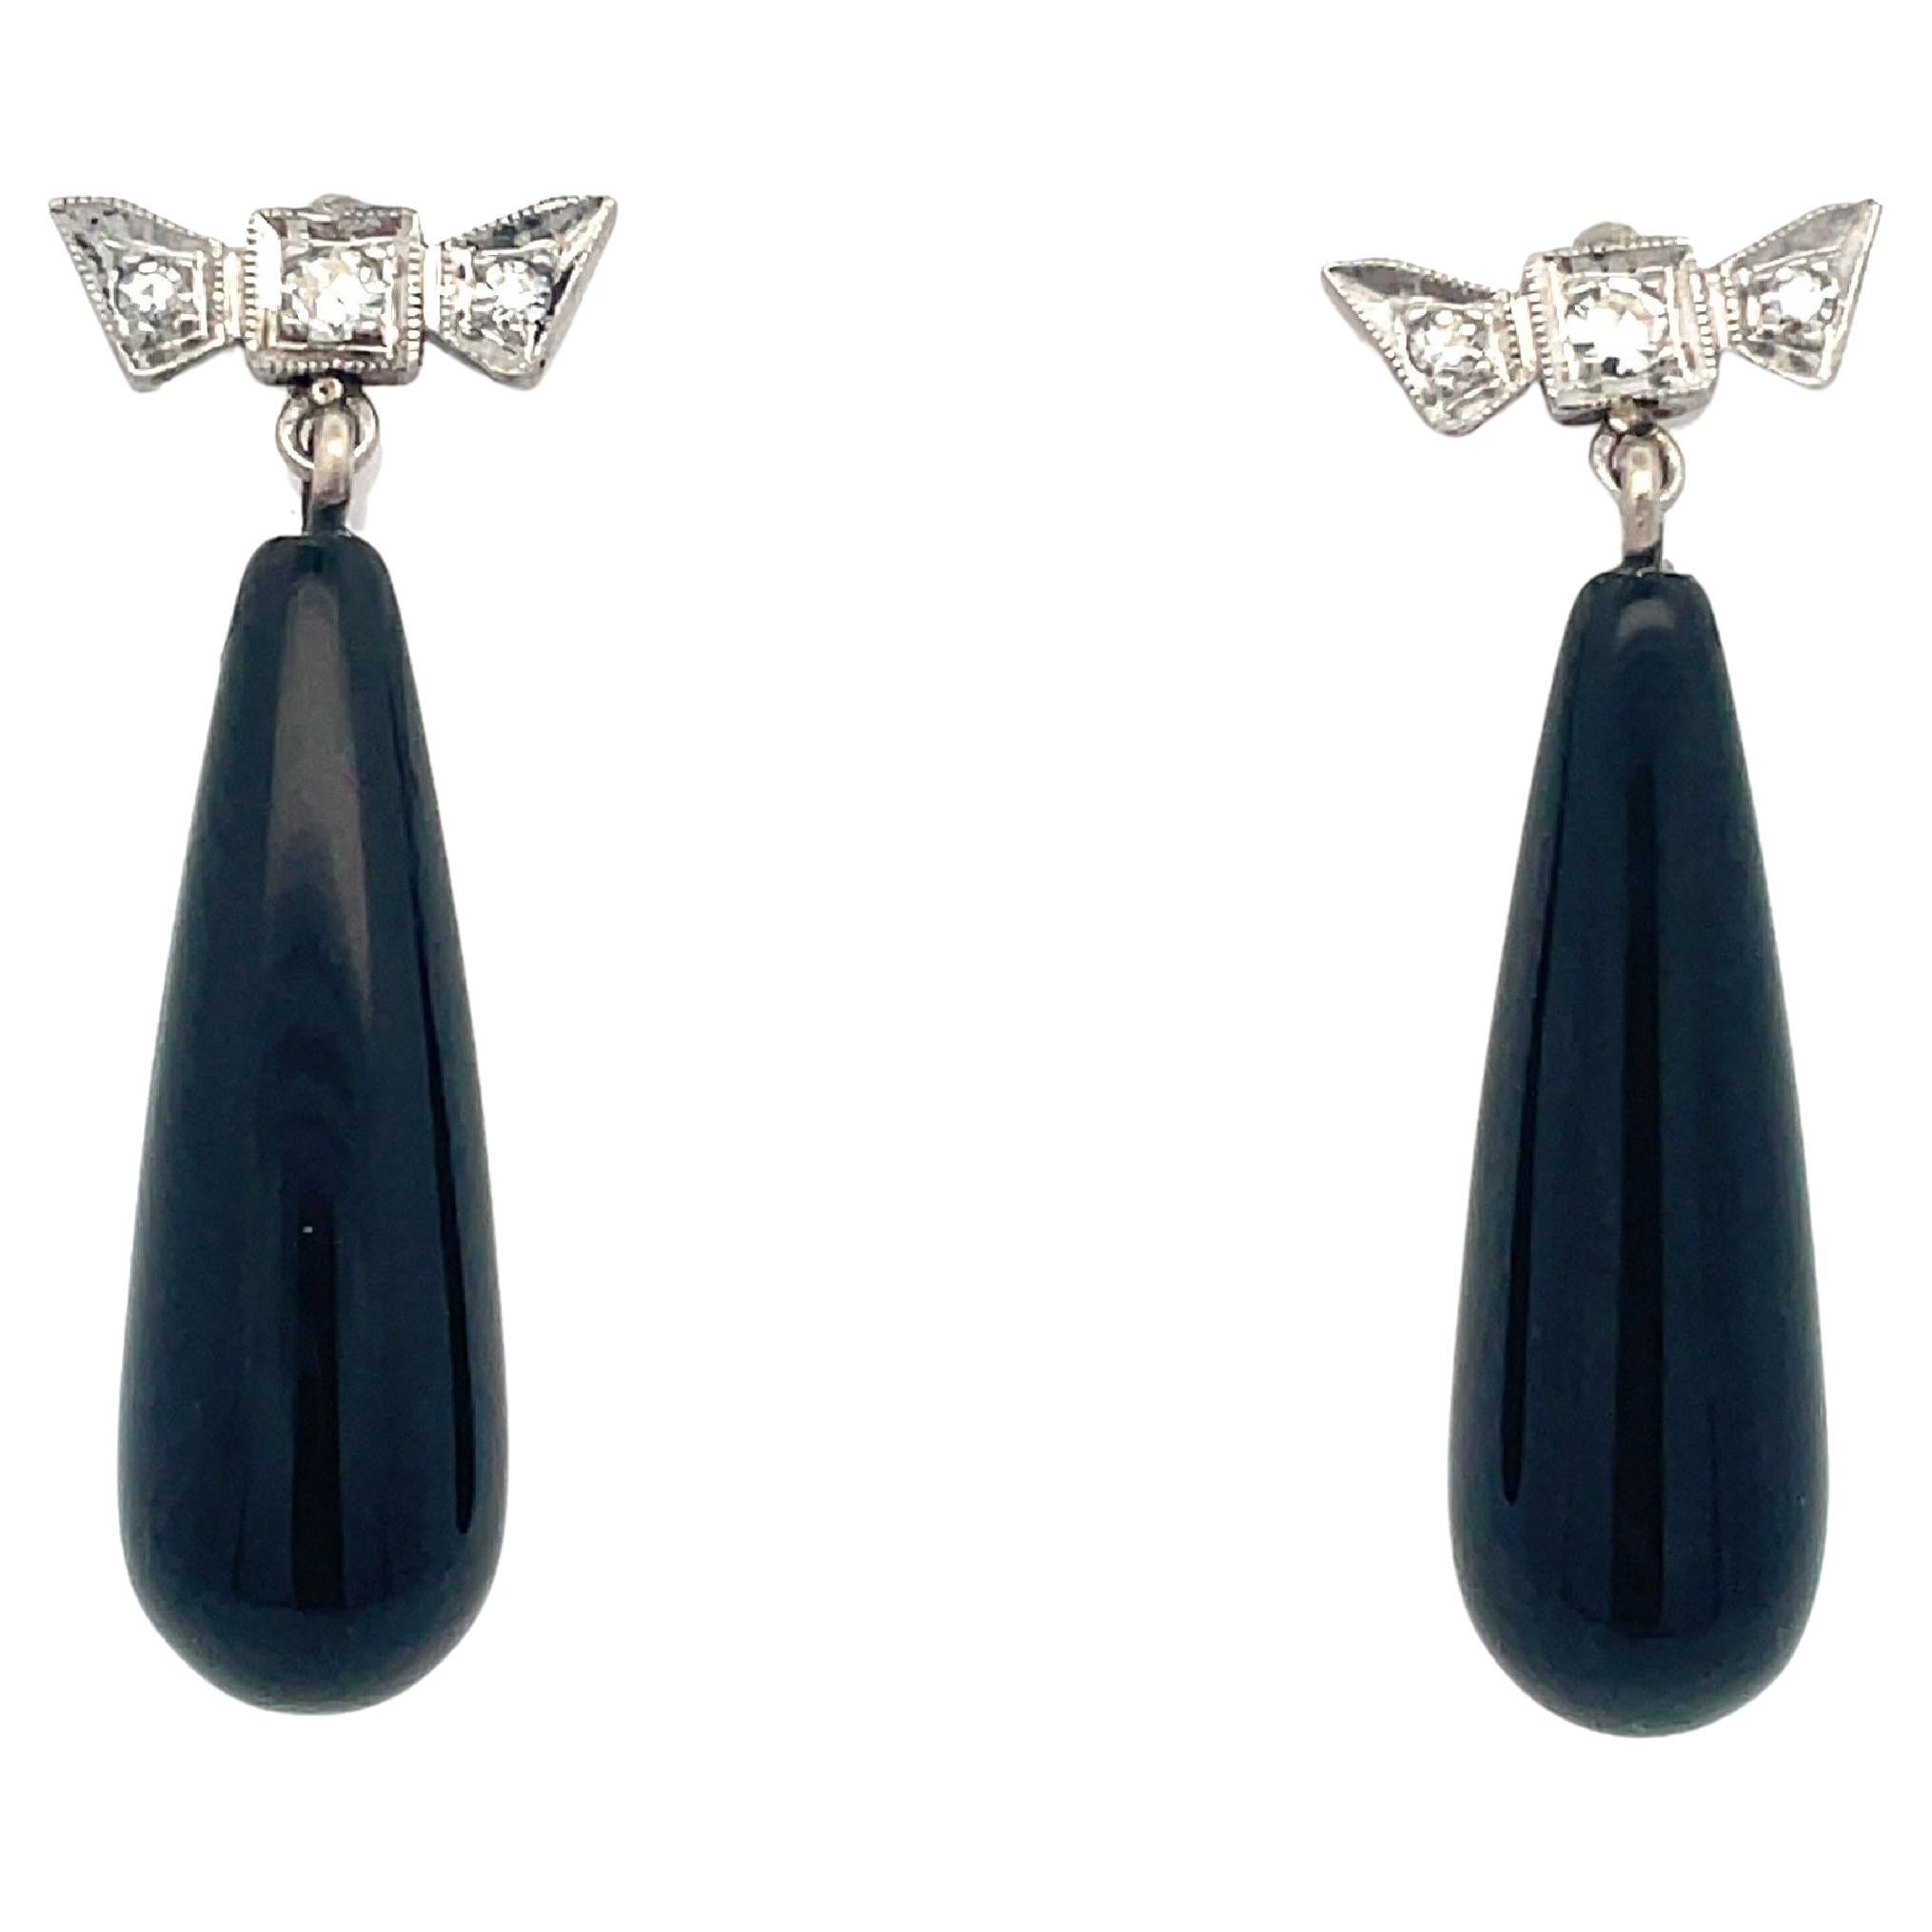 1950s Retro 14k White Gold Diamond and Onyx Earrings For Sale